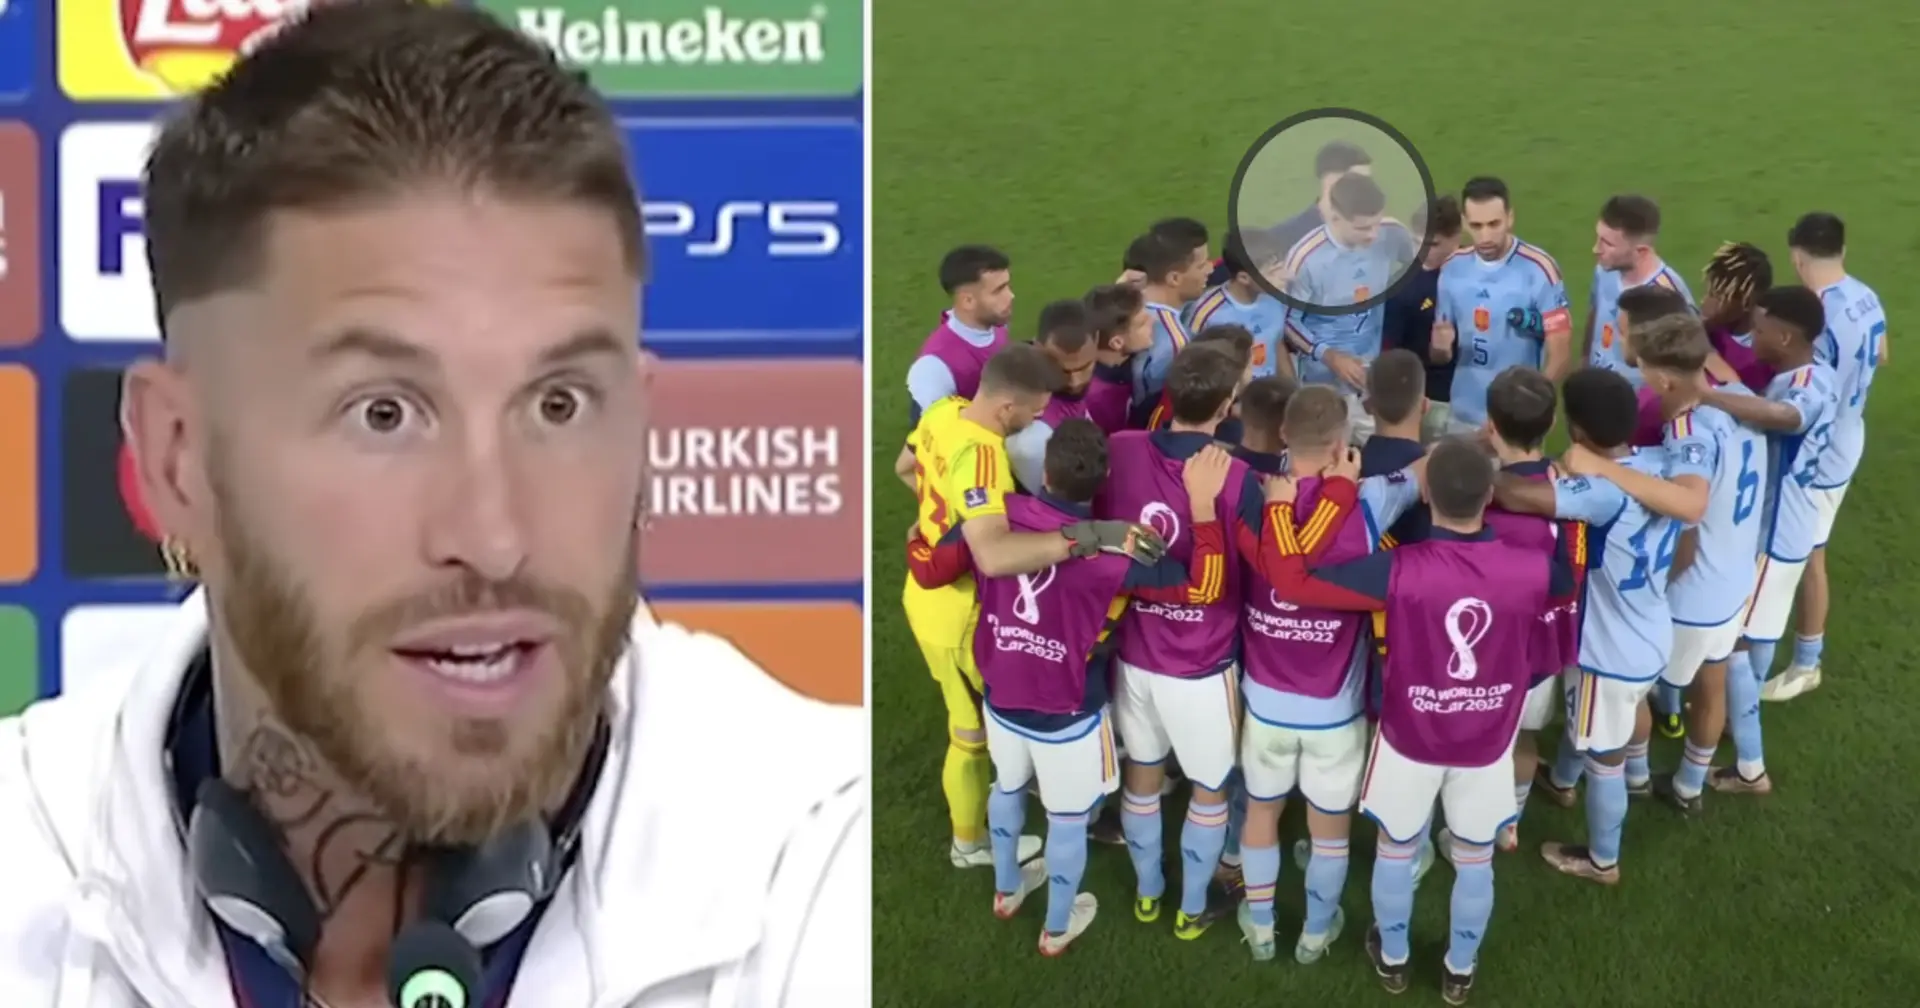 Revealed: Who inherited Spain's captain armband after Sergio Ramos' retirement -- not Carvajal or Nacho